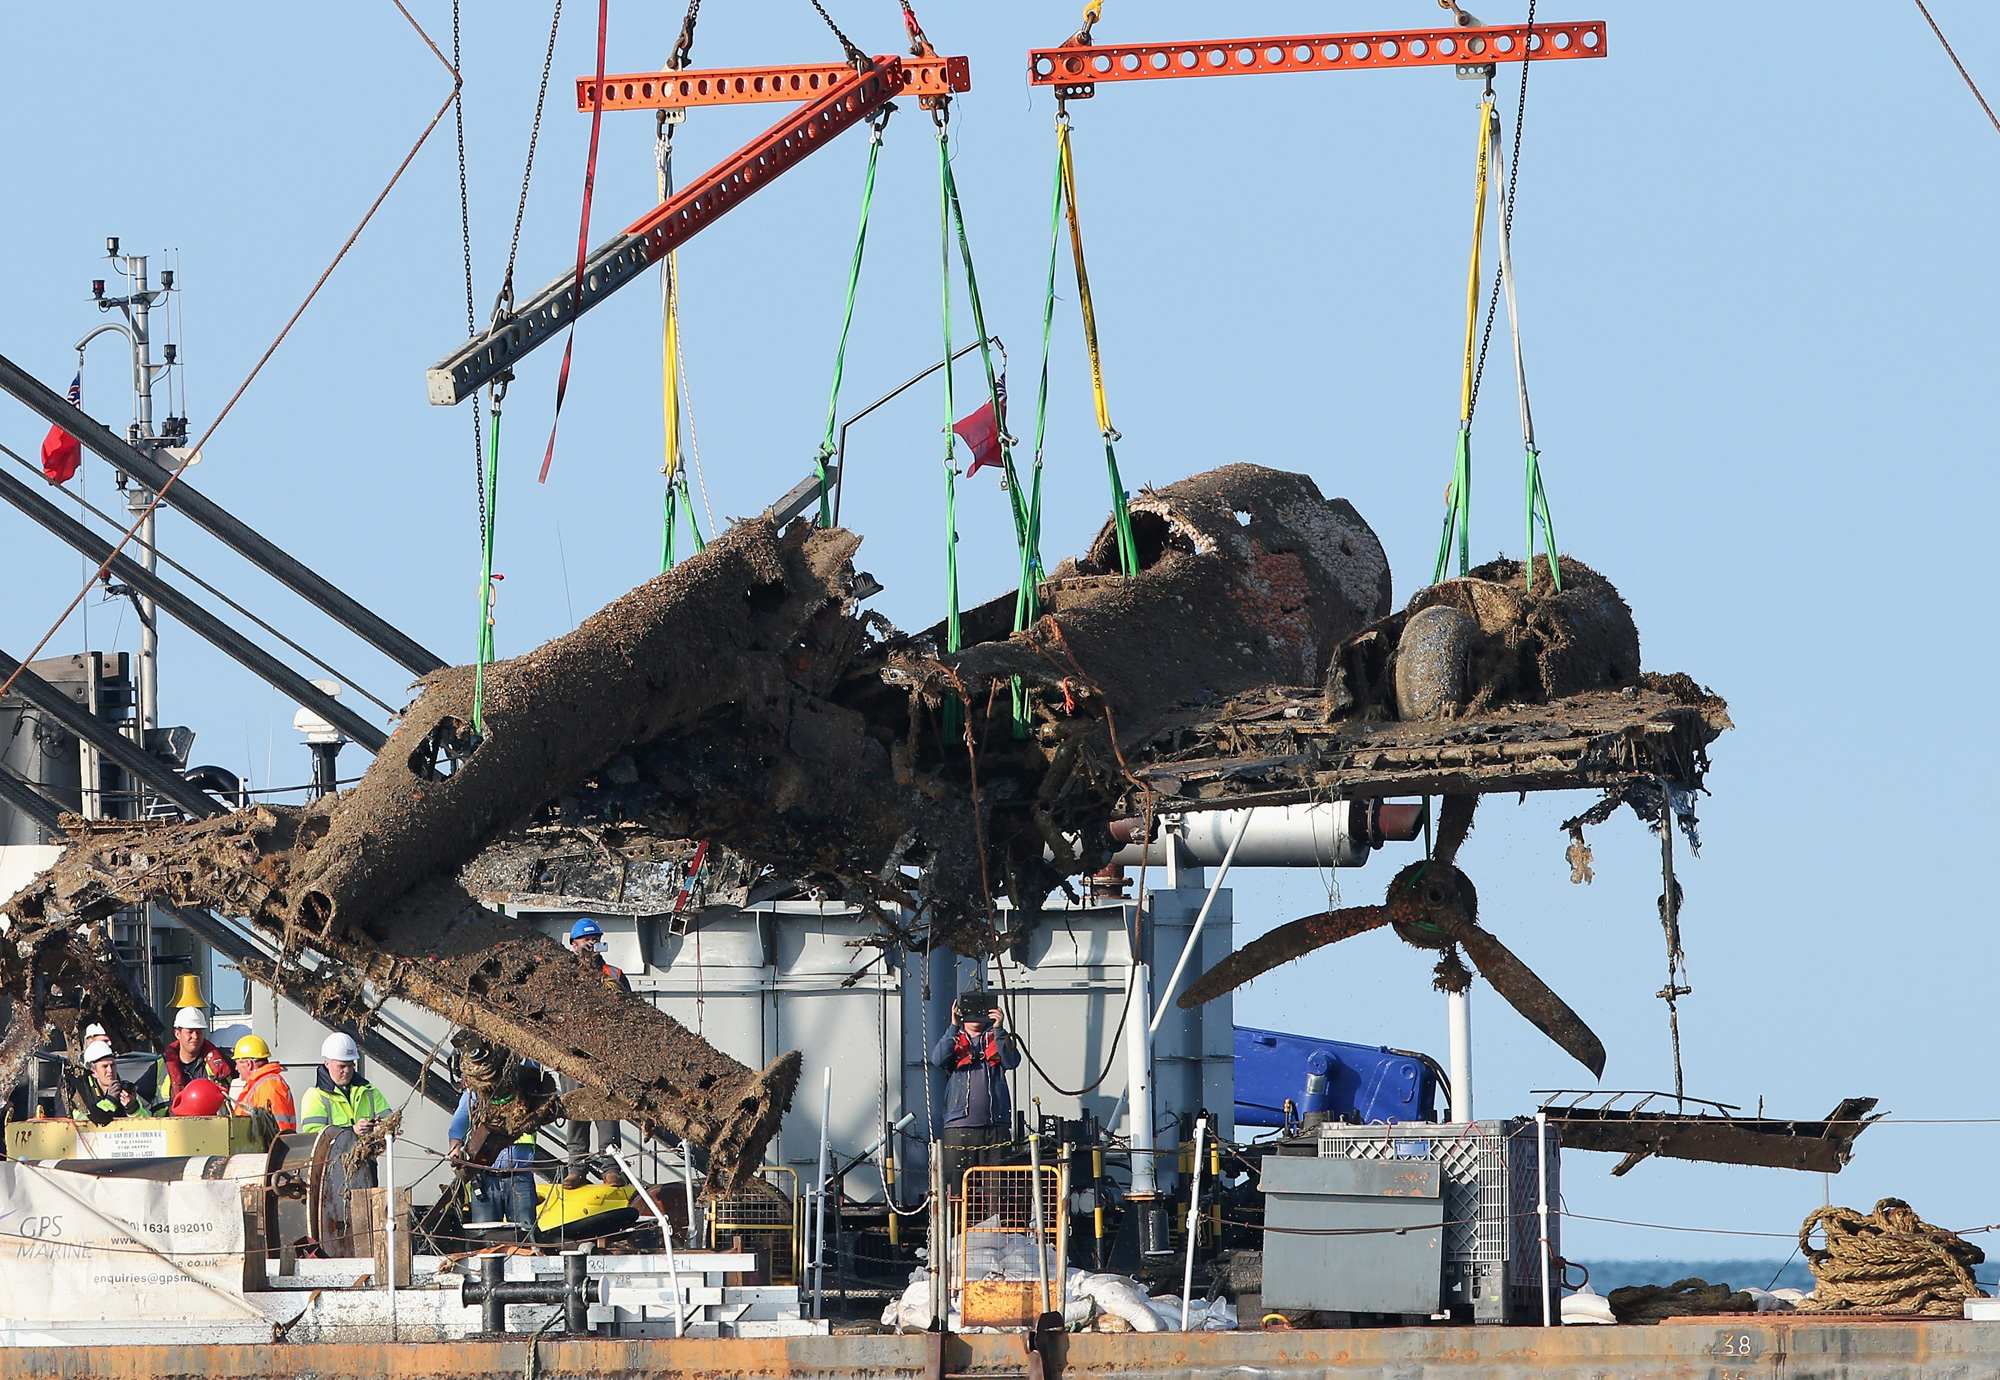 RAMSGATE, ENGLAND - JUNE 10:  A World War II Dornier 17 aircraft is lifted from waters of the English Channel on June 10, 2013 in Ramsgate, England.  (Photo by Peter Macdiarmid/Getty Images)